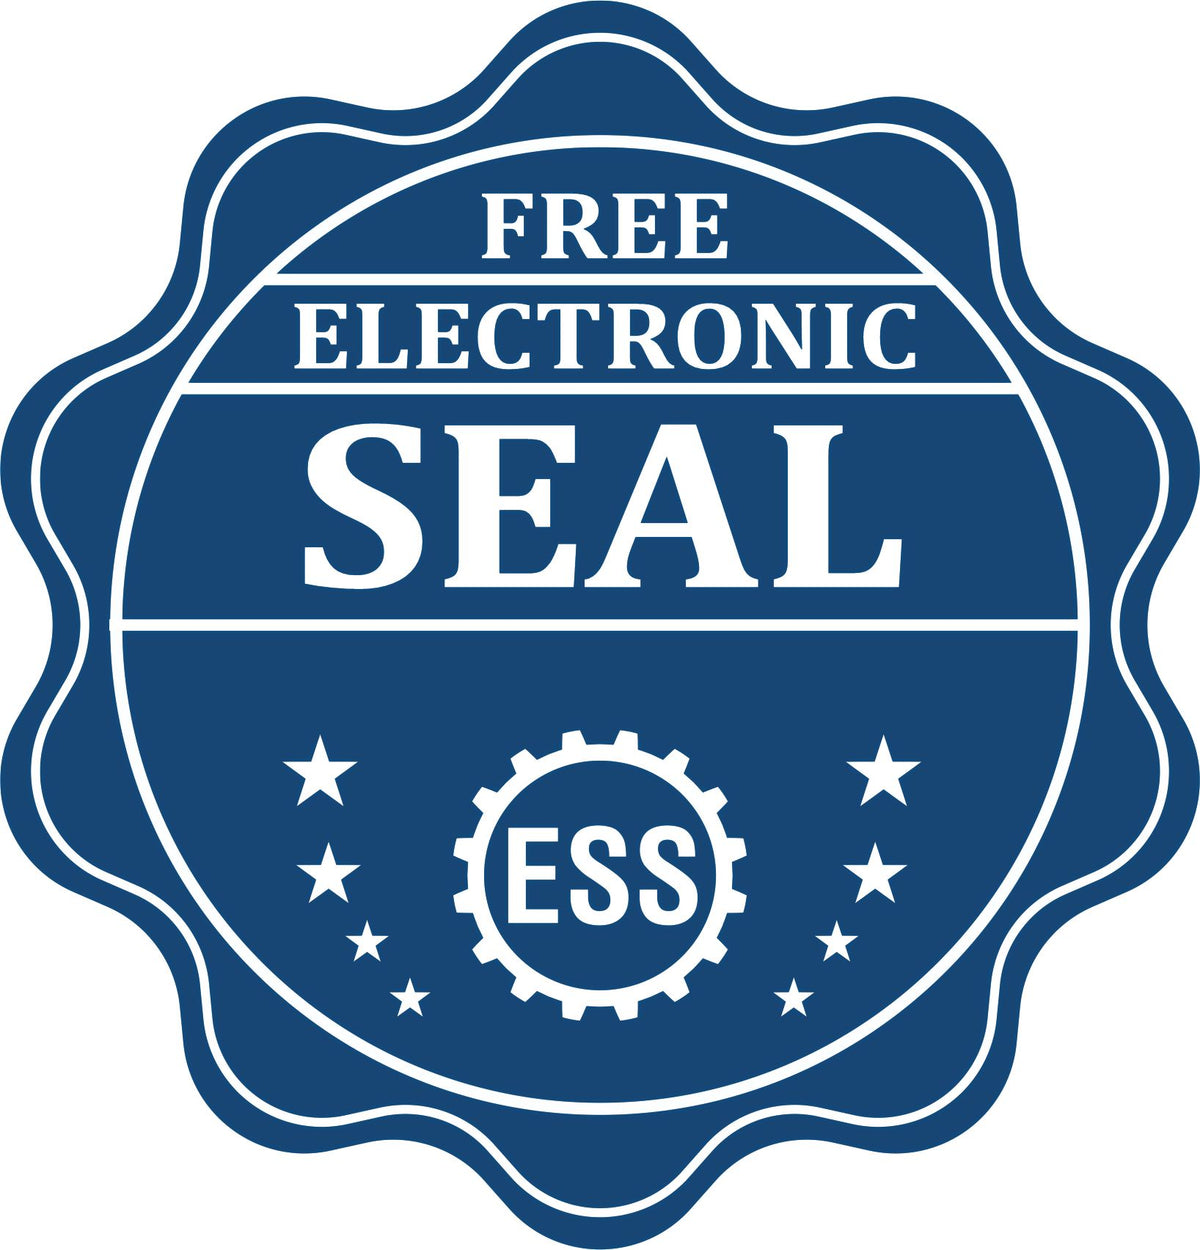 A badge showing a free electronic seal for the Extended Long Reach Kansas Surveyor Embosser with stars and the ESS gear on the emblem.